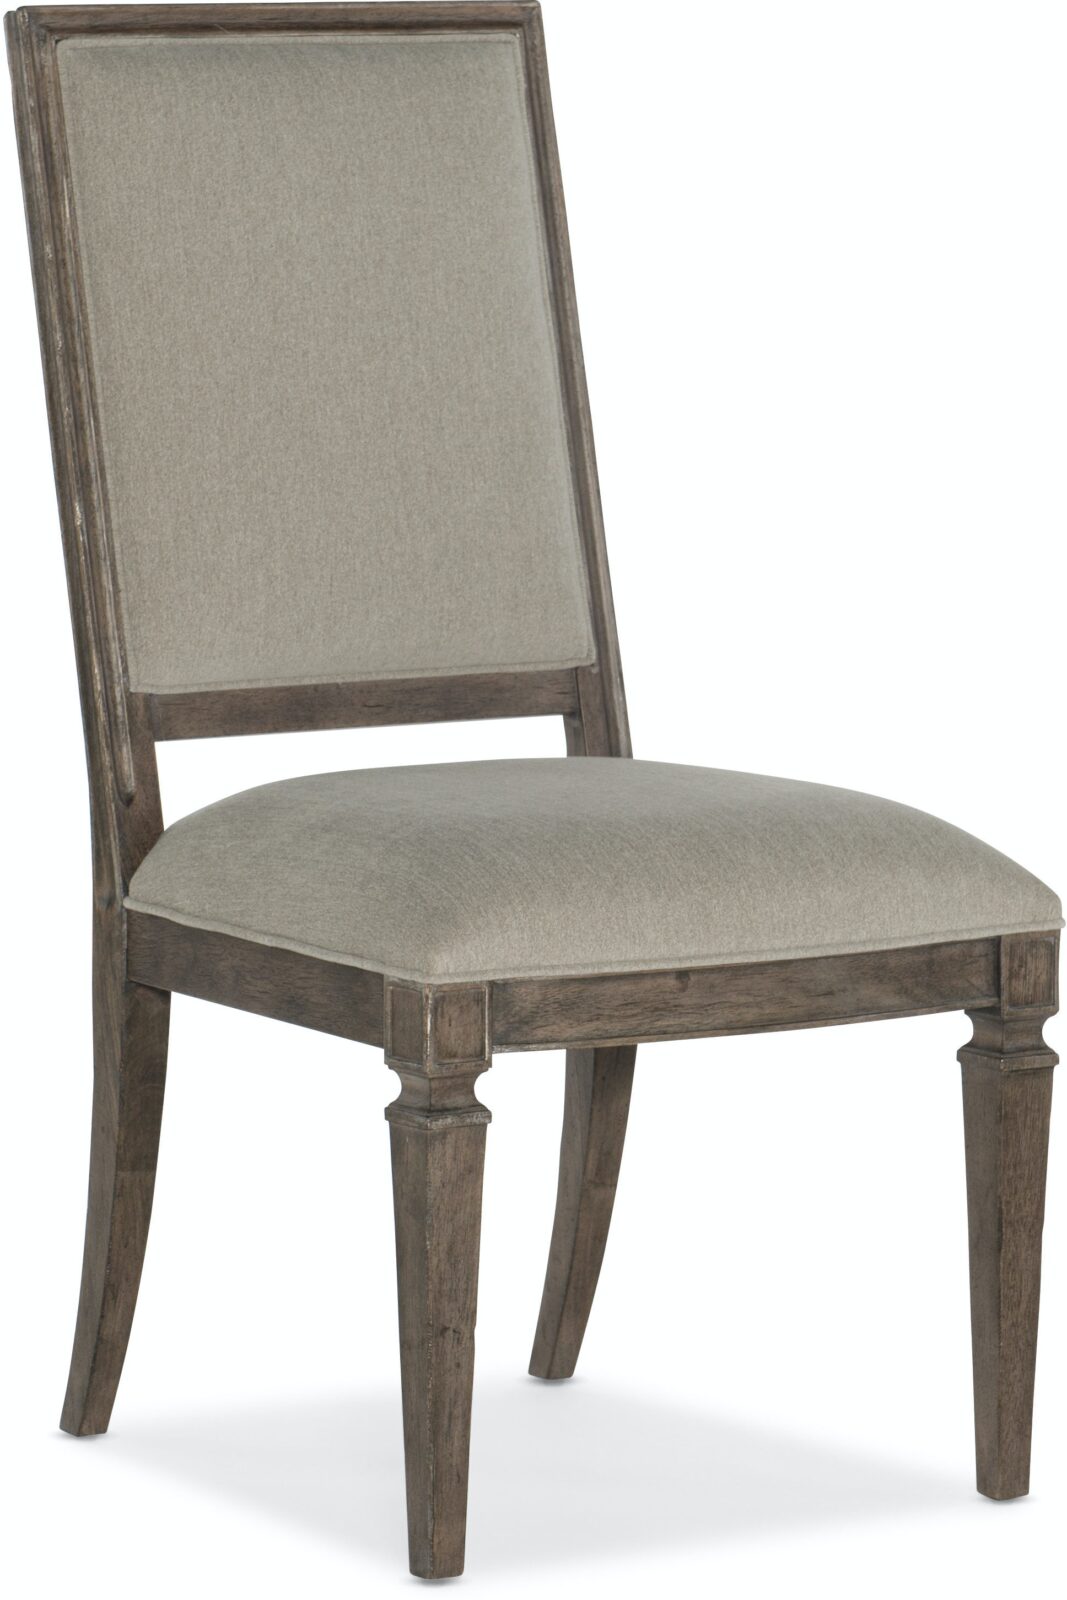 Woodlands Upholstered side chair